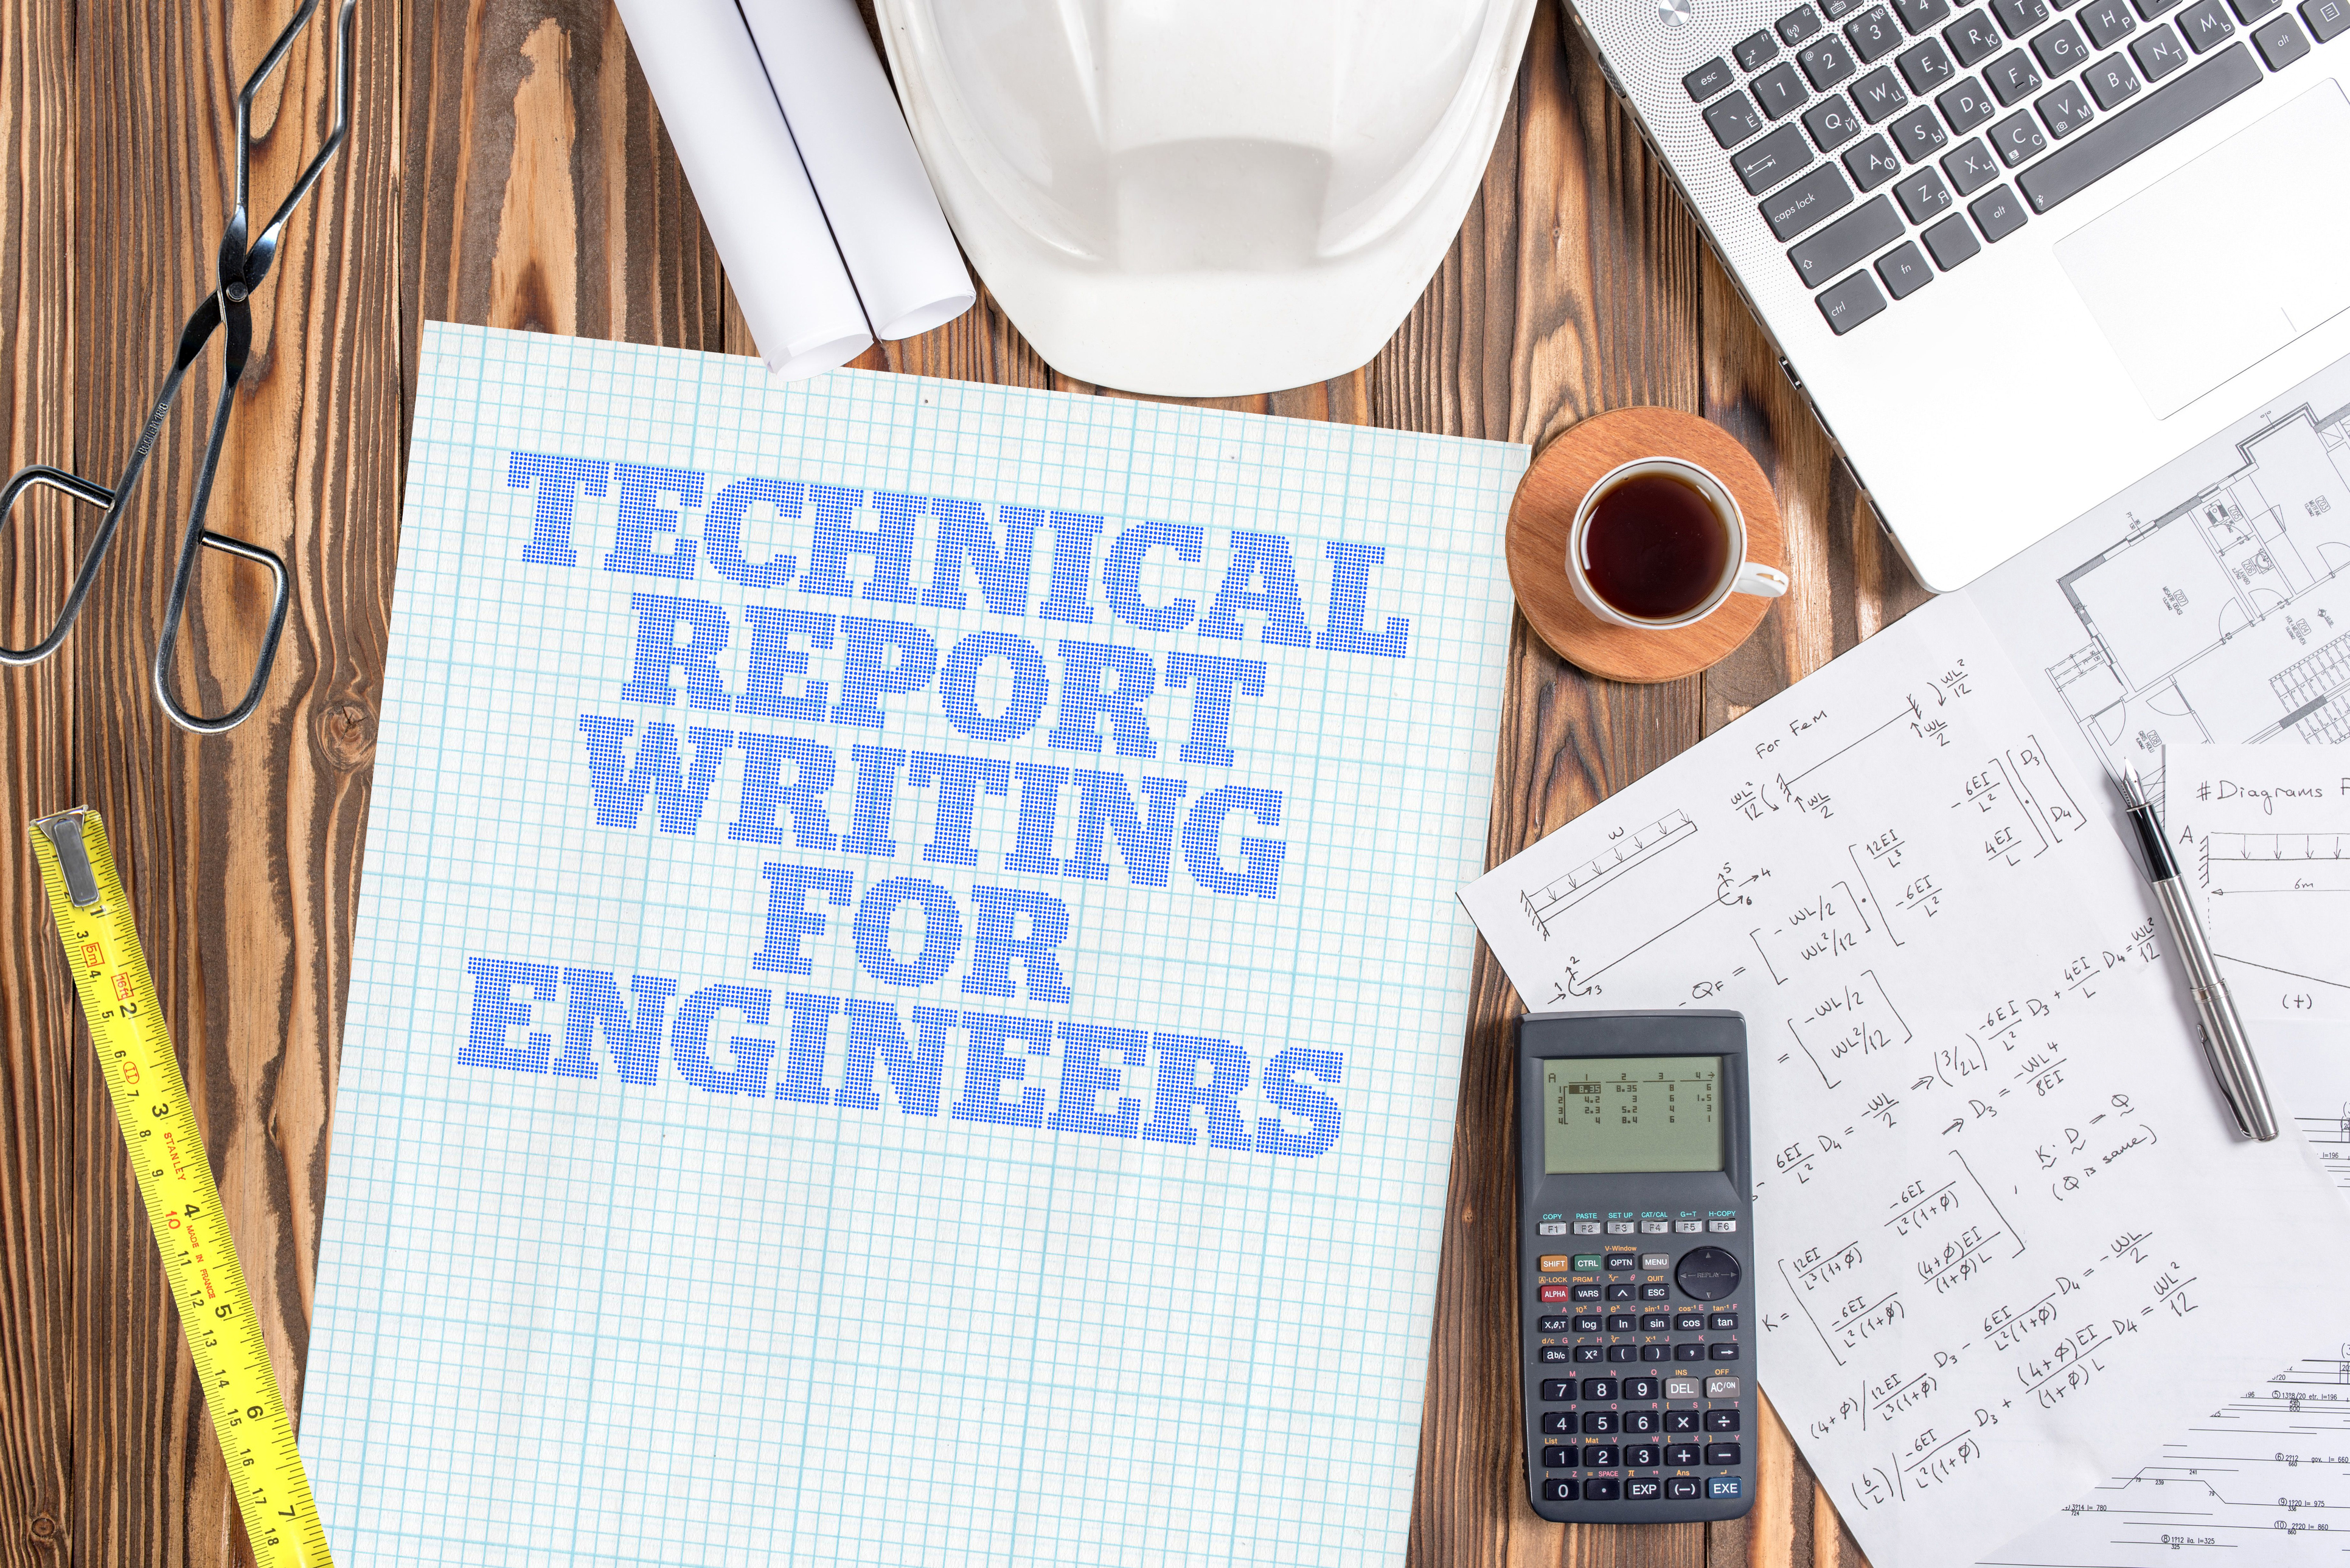 Technical Report Writing & Presentation Skills for Engineers & Technical Personnel